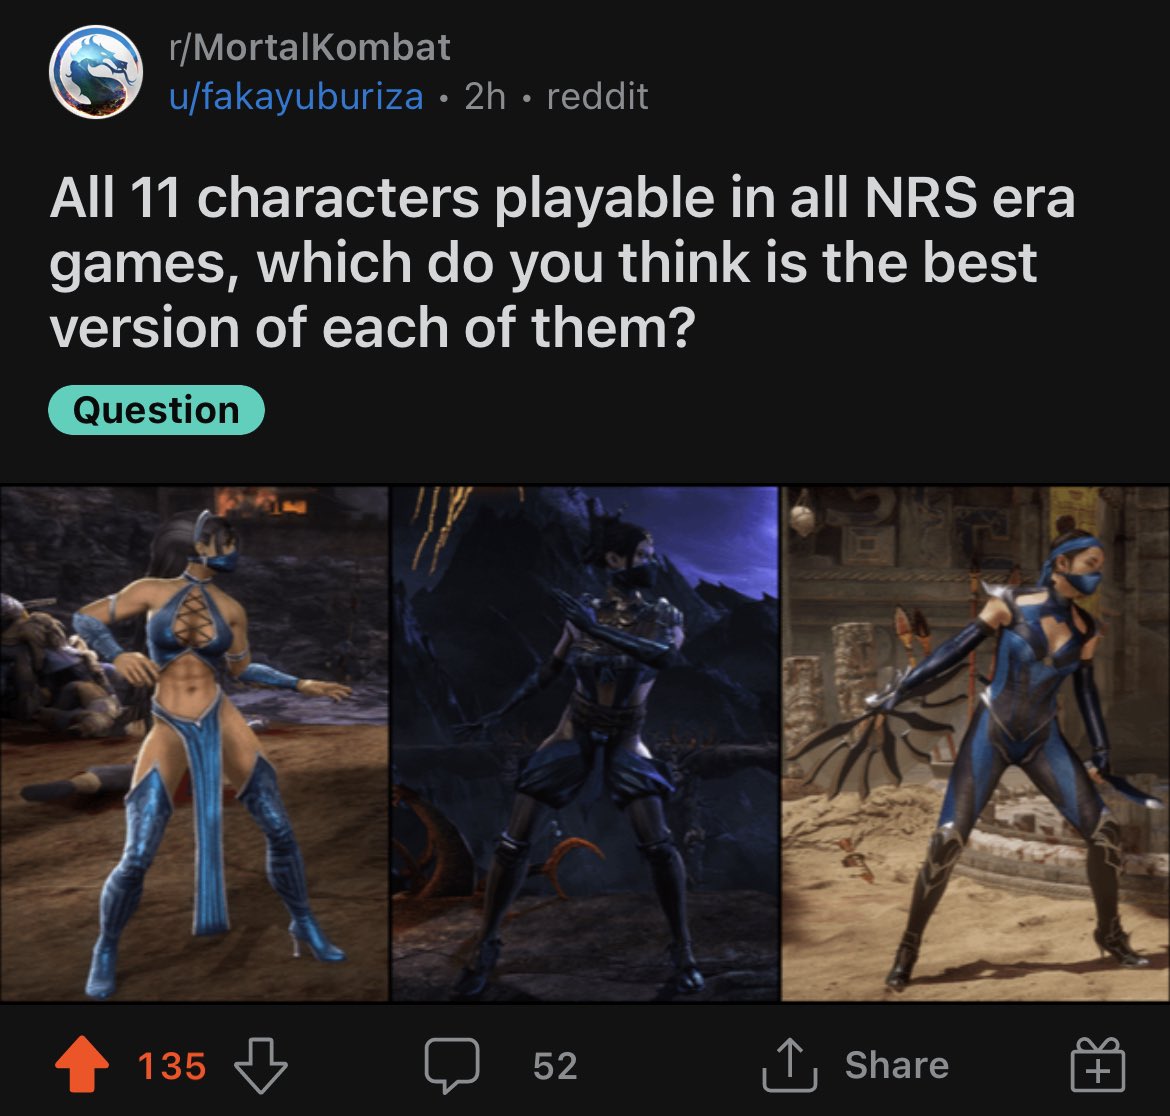 You will never convince me X-11 Kitana were a downgrade design wise